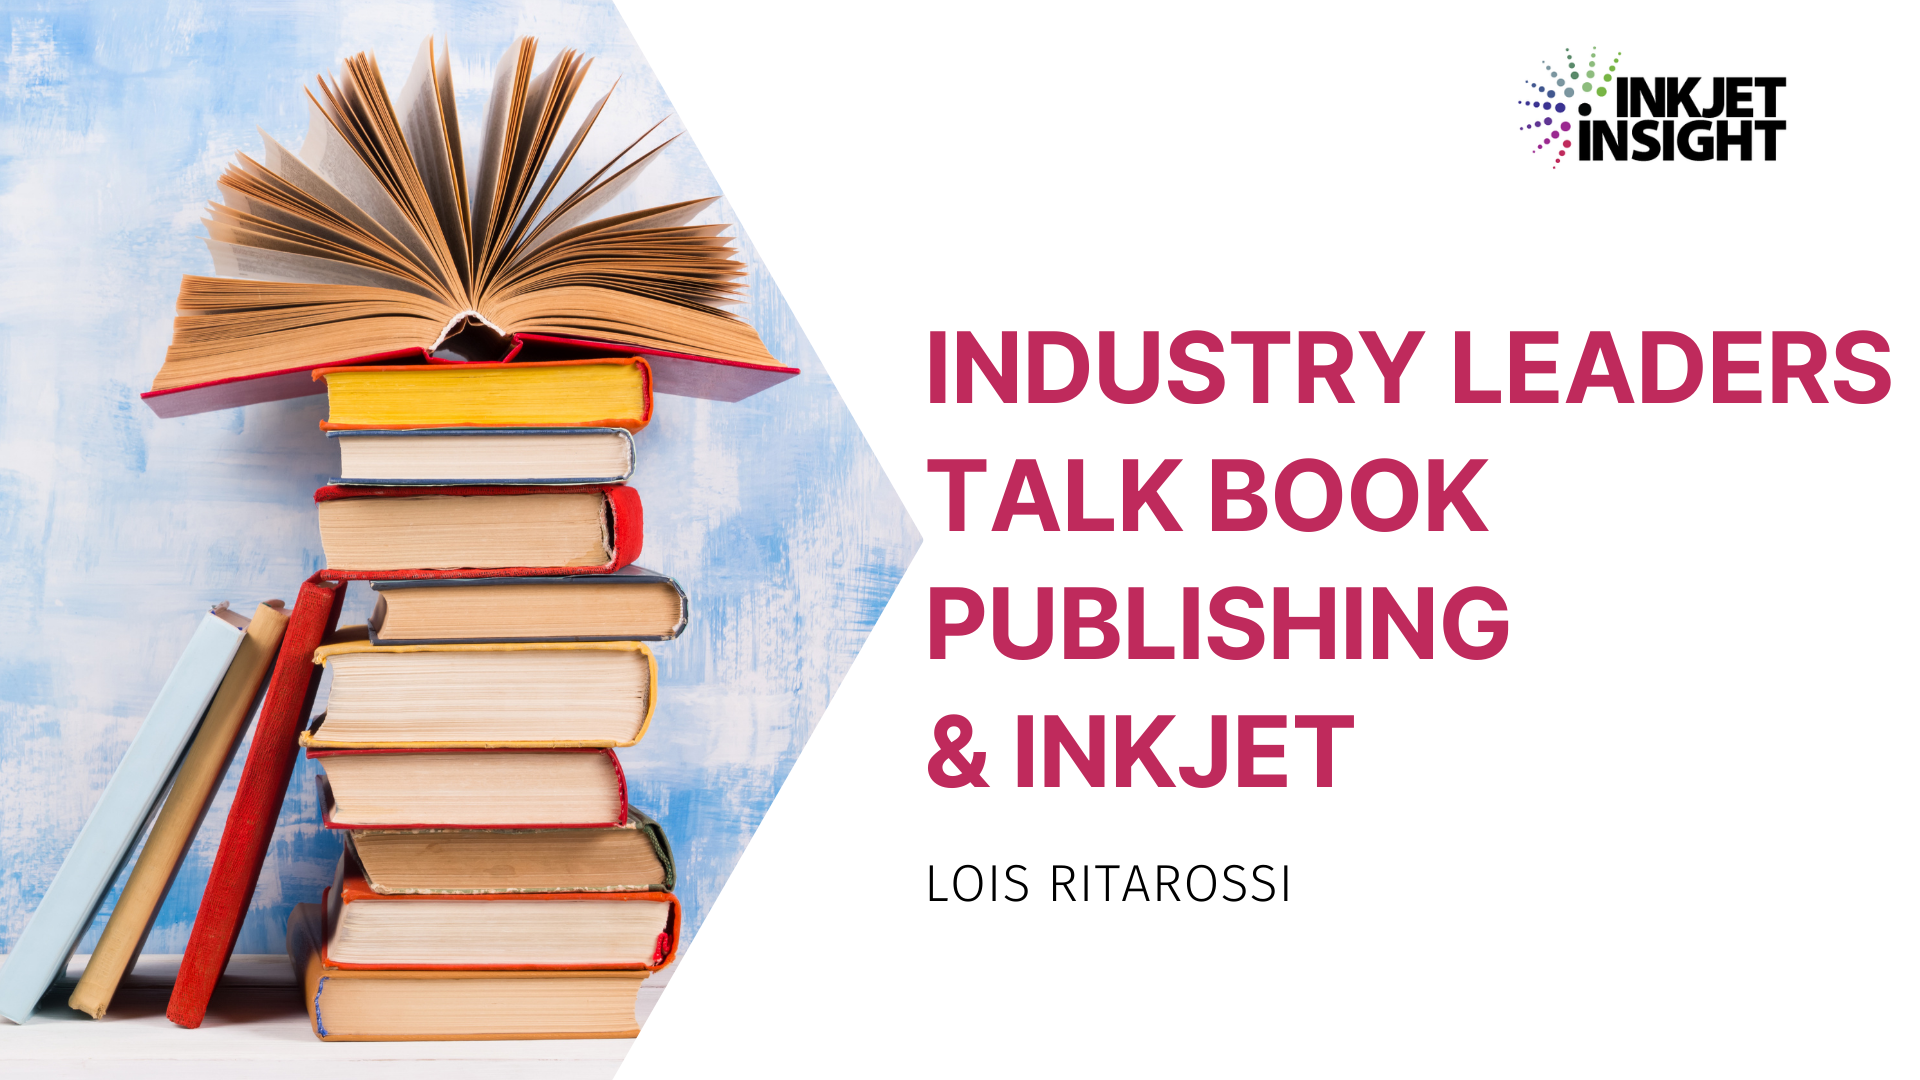 Featured image for “Industry Leaders Talk Book Publishing & Inkjet”